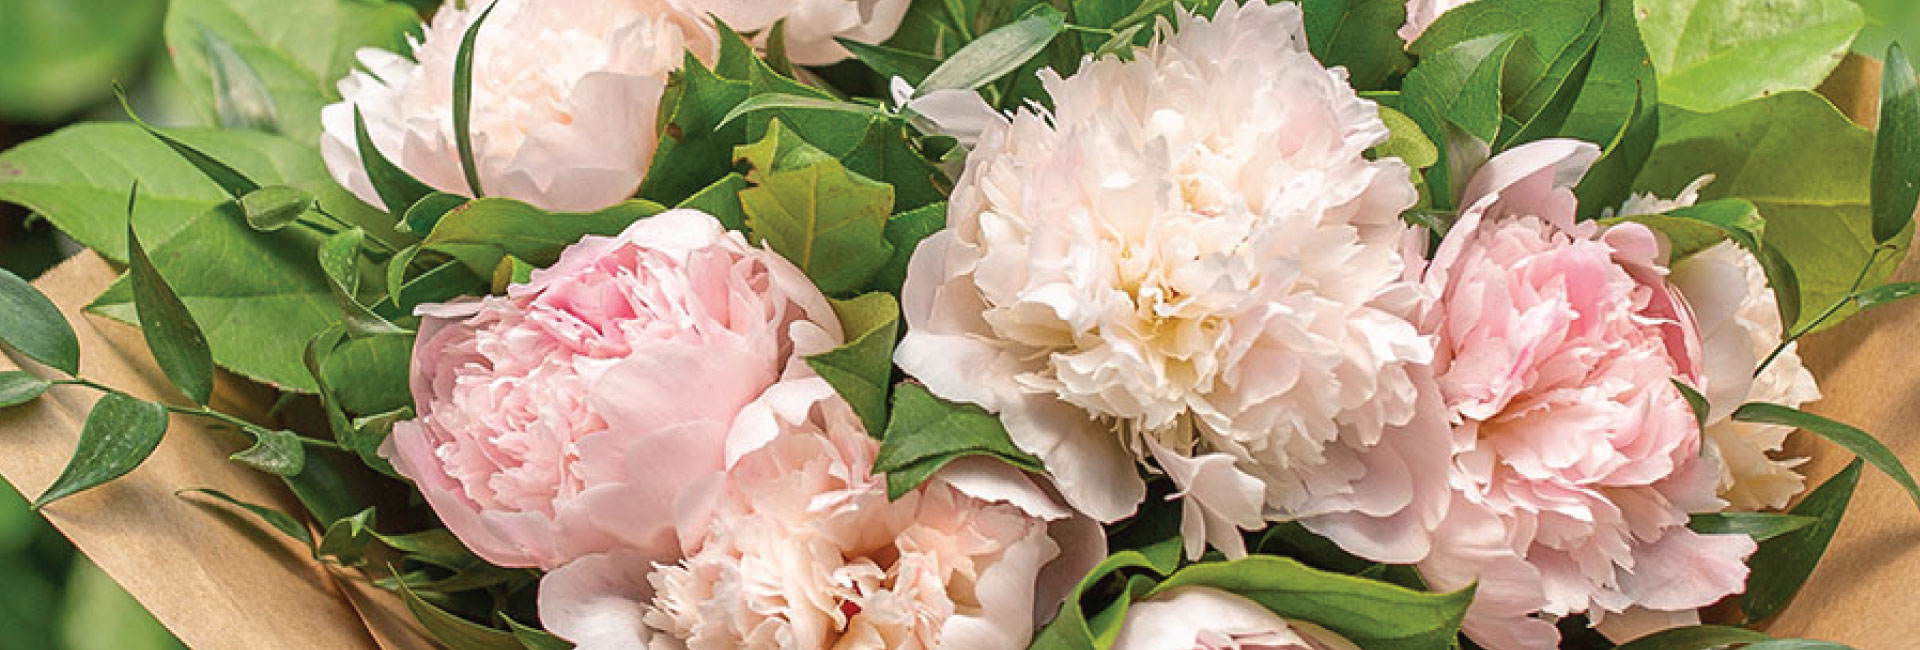 Flower Feature: Peony Blooms